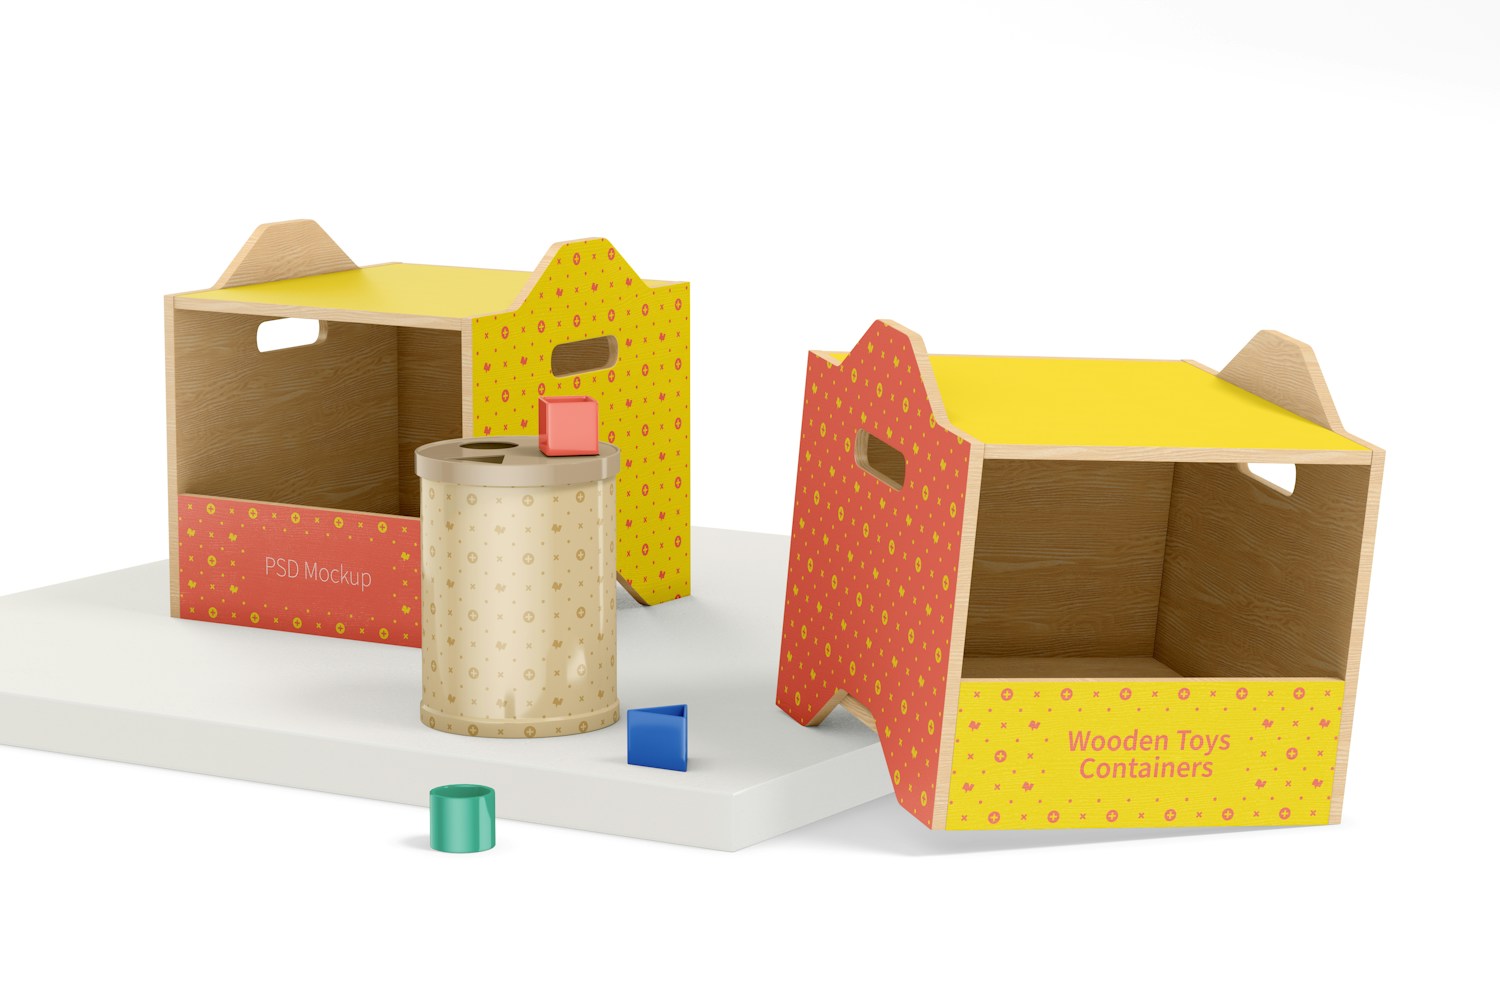 Wooden Toys Containers Mockup, Perspective